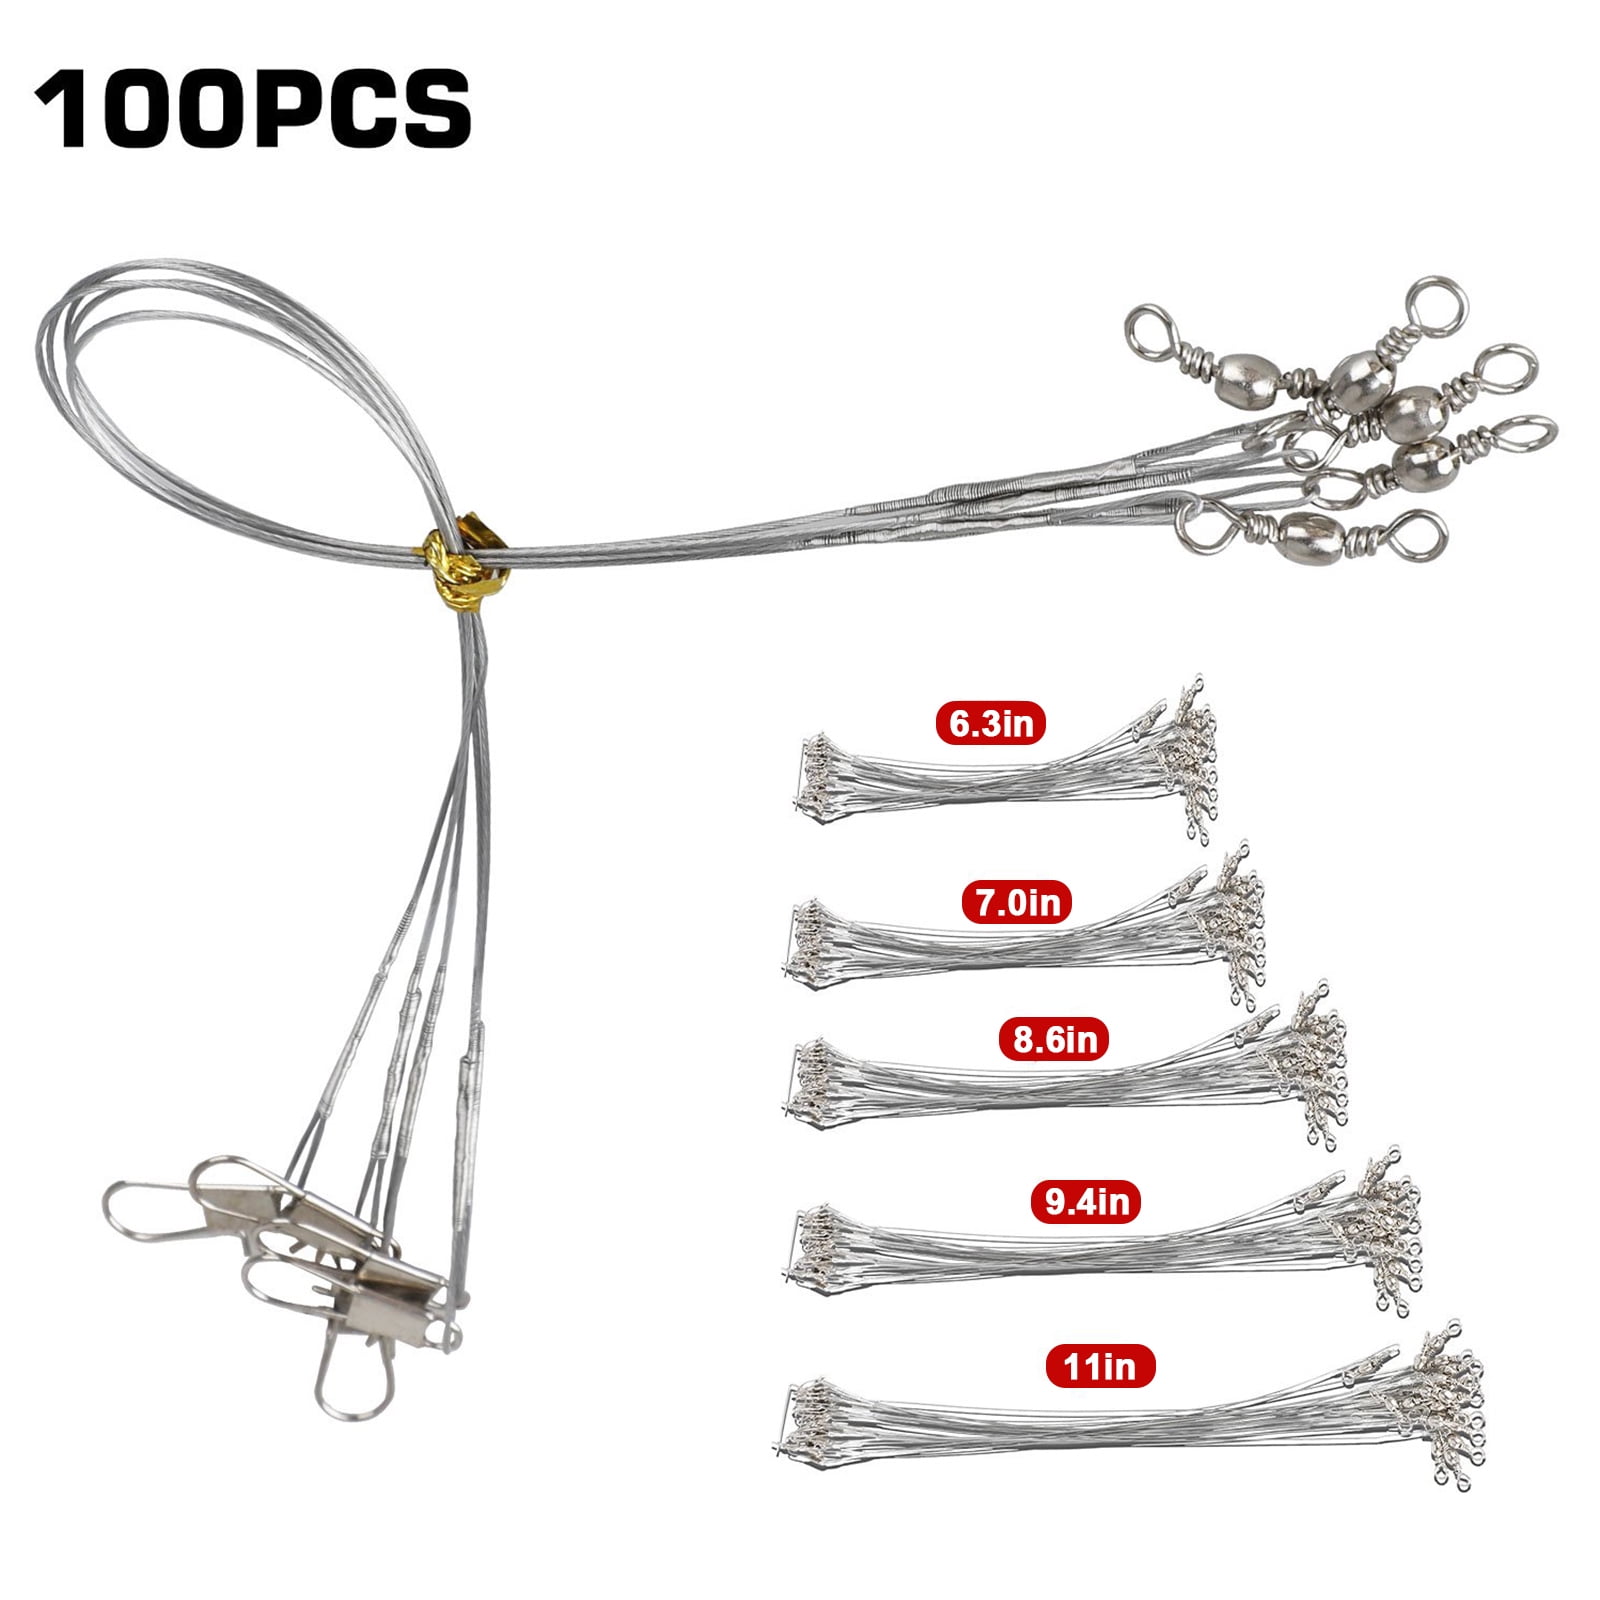 100PCS Fishing Wire Trace Lure Leaders, TSV Stainless Steel High-Strength Fishing  Wire Rigs Fishing Beads Fishing Trace Lures Steel Wire Leader Fishing Line  Tackle 